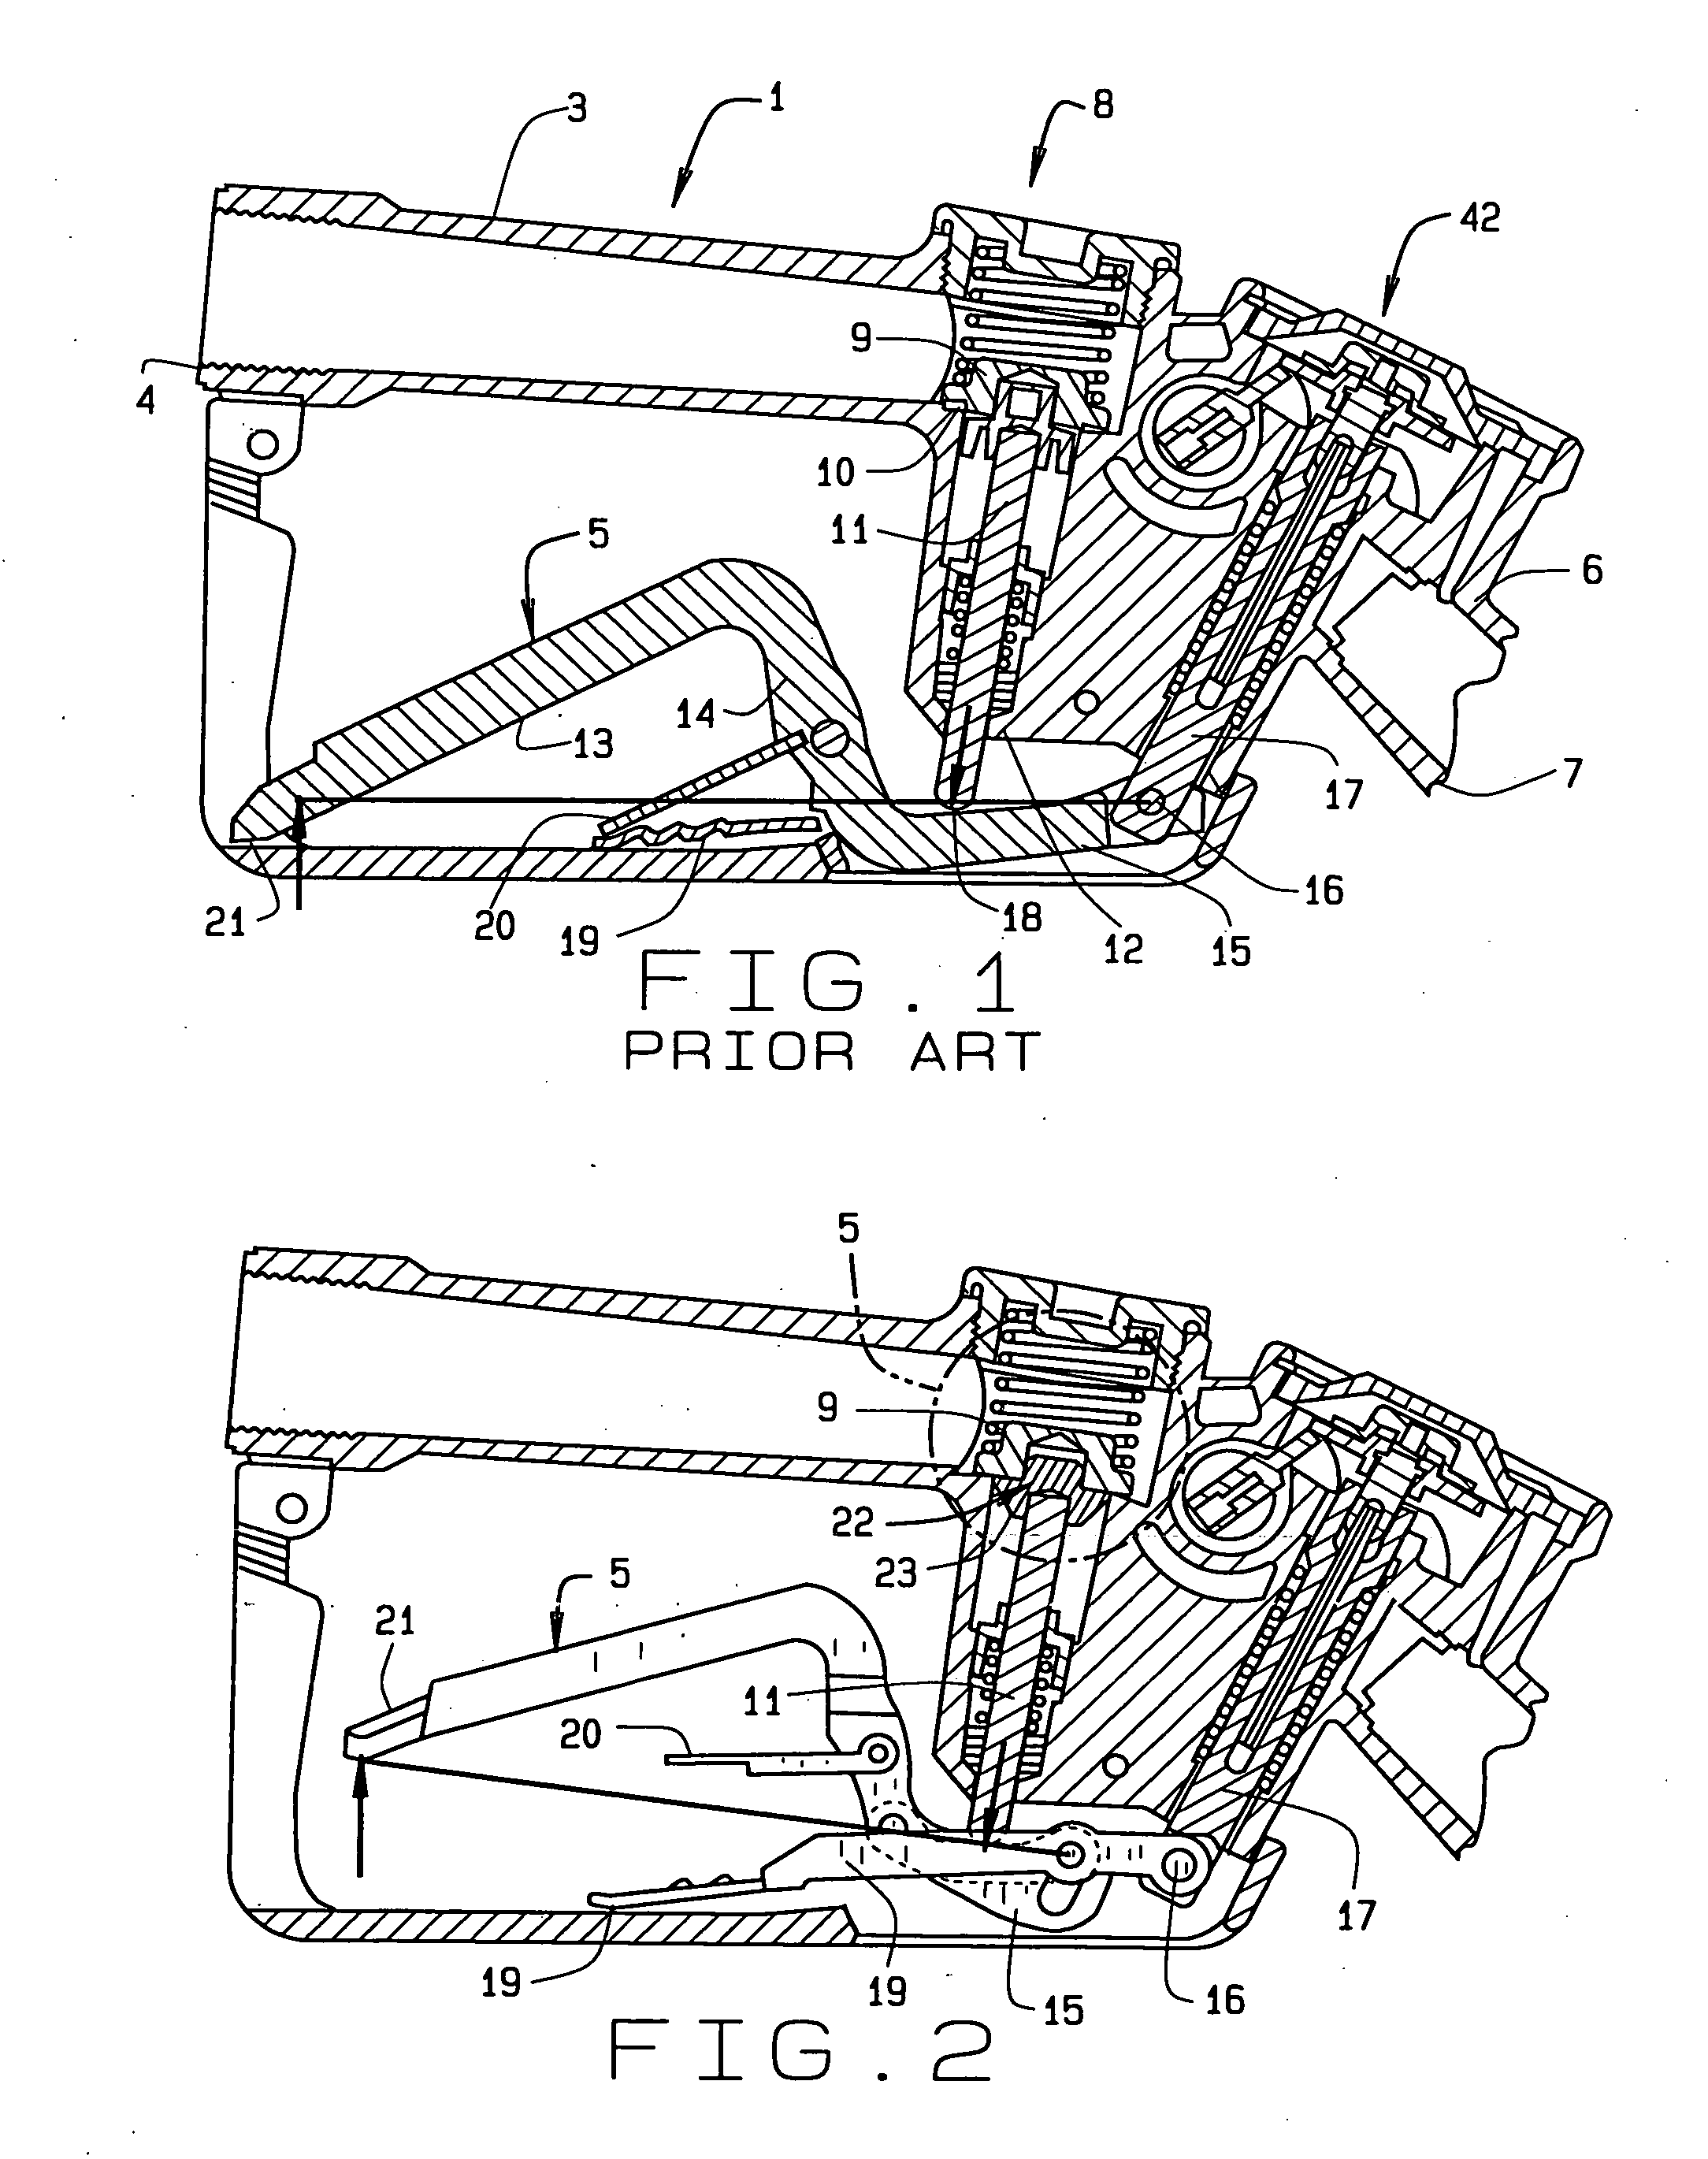 Nozzle construction to facilitate its opening and enhance the flow of fuel through the nozzle